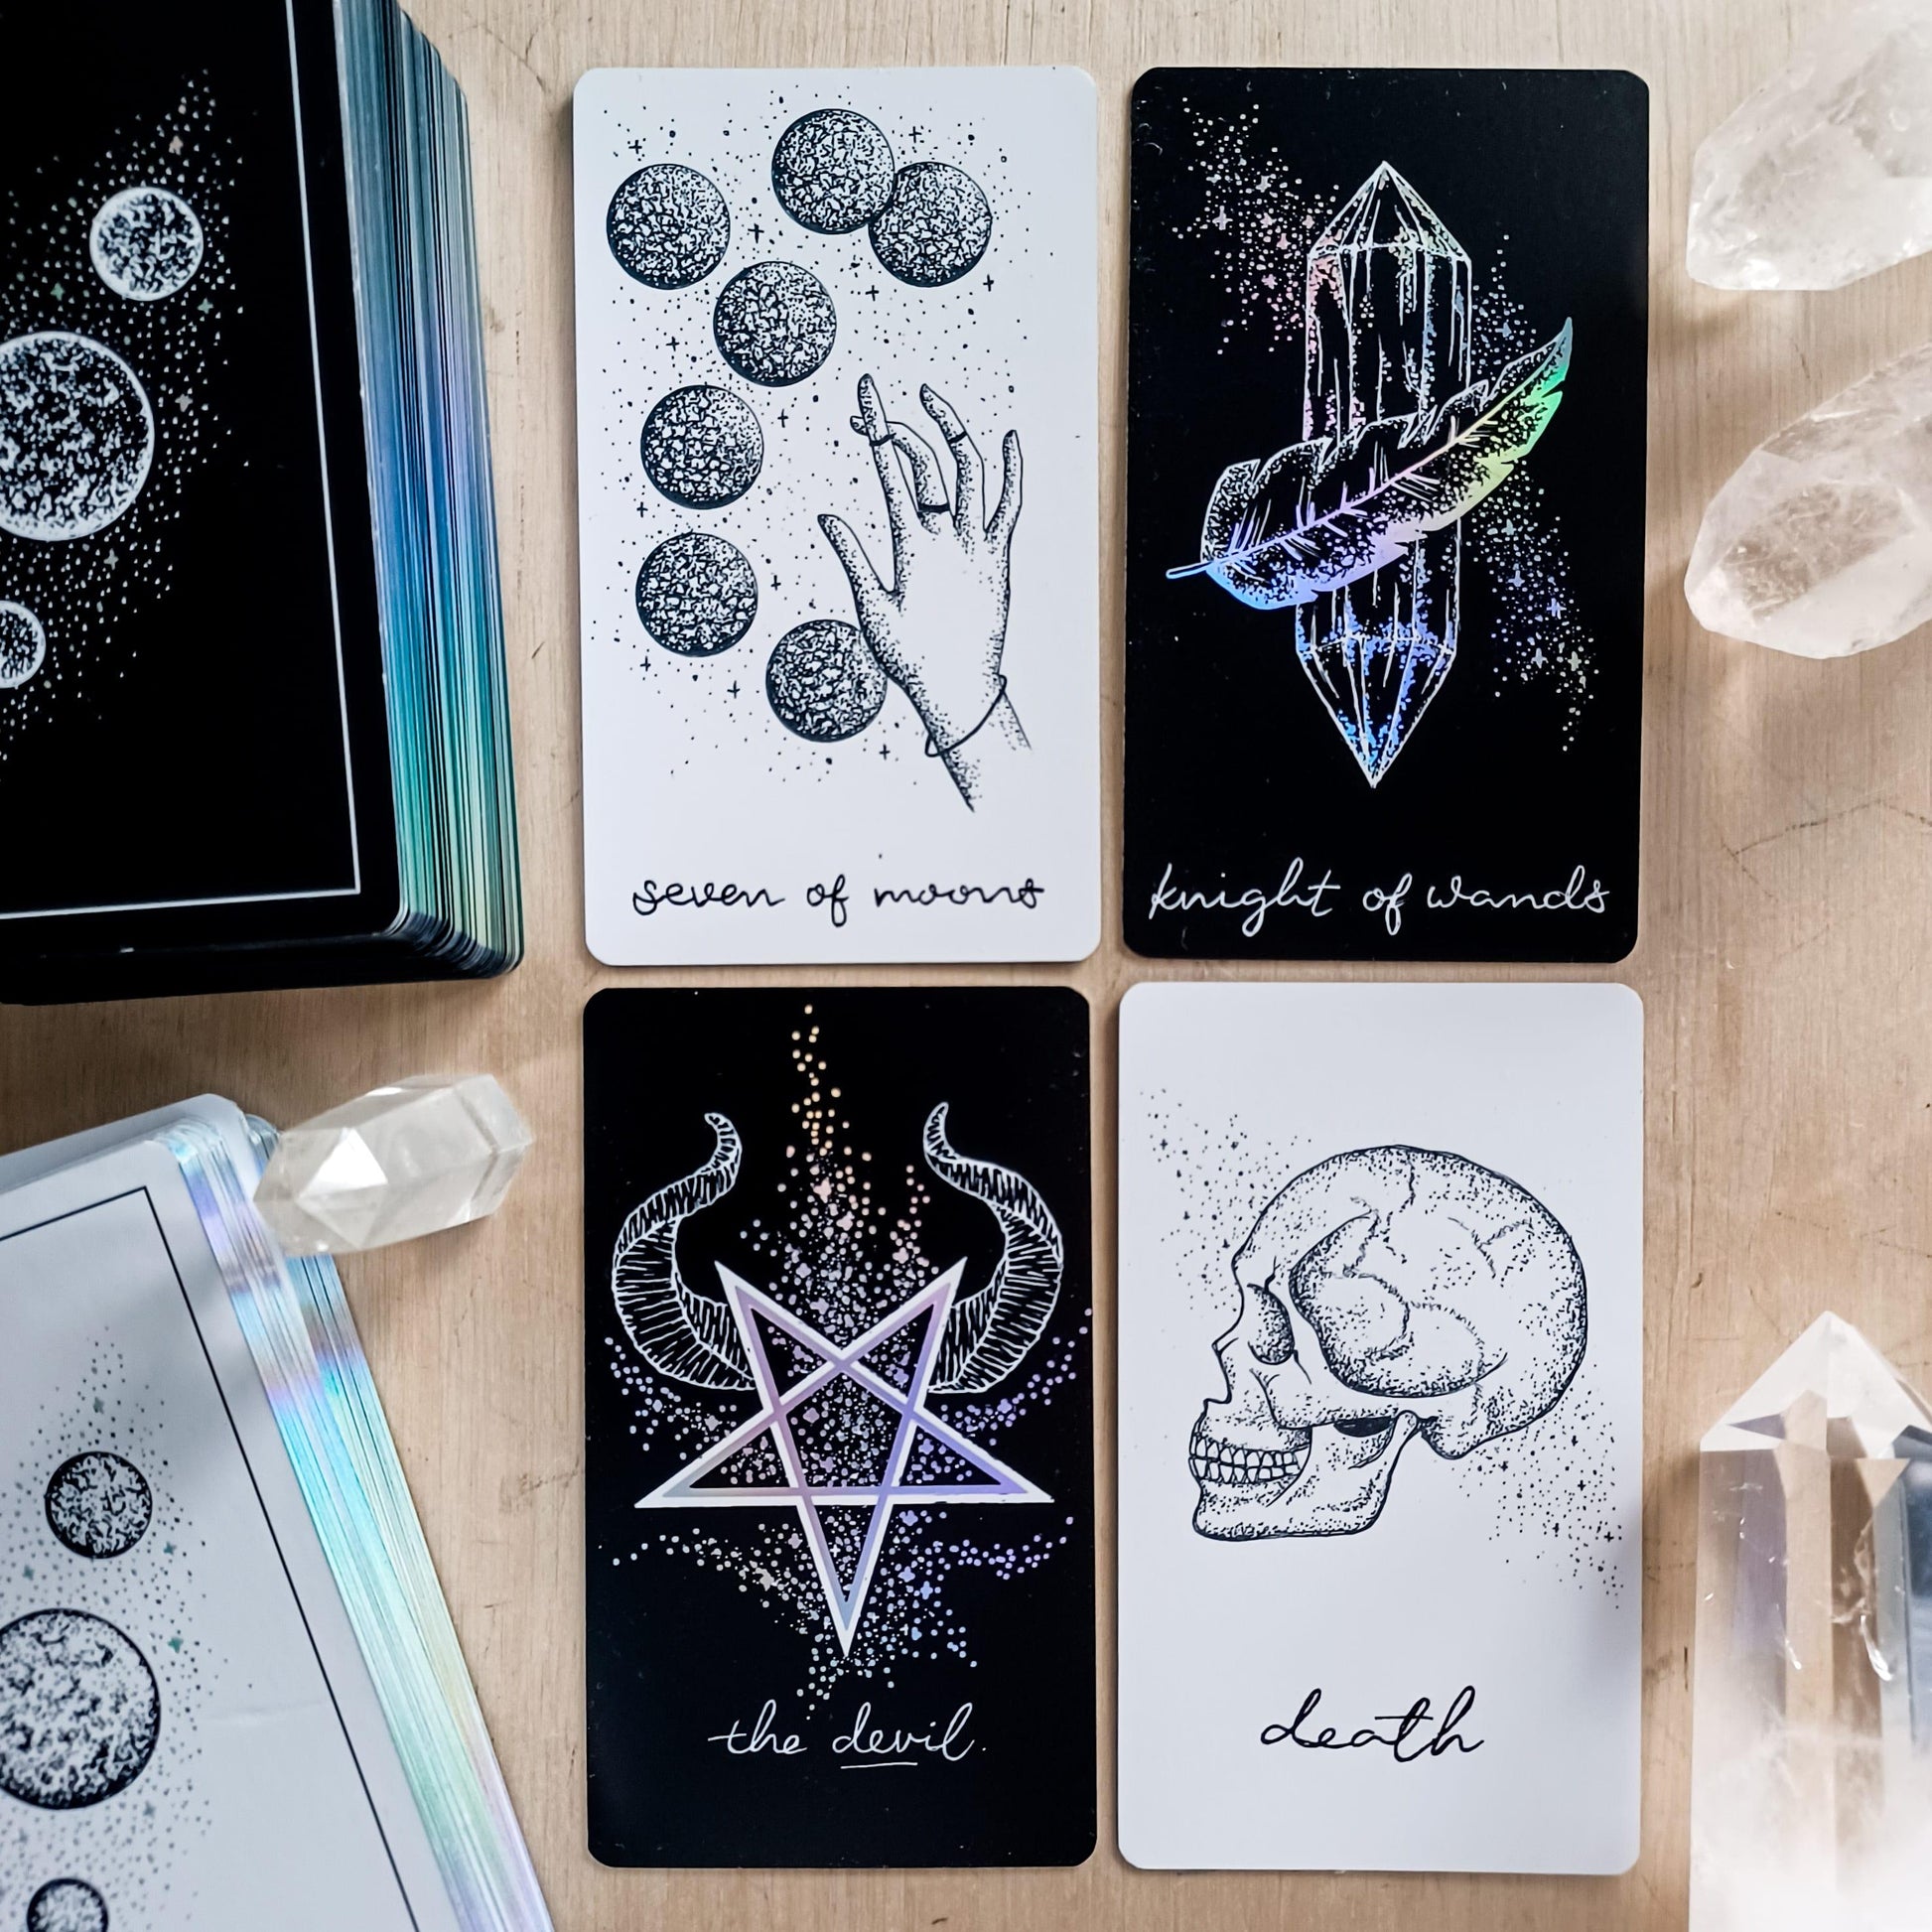 shows cards from Wandering Moon Tarot & inverted cards from its special edition indie counterpart